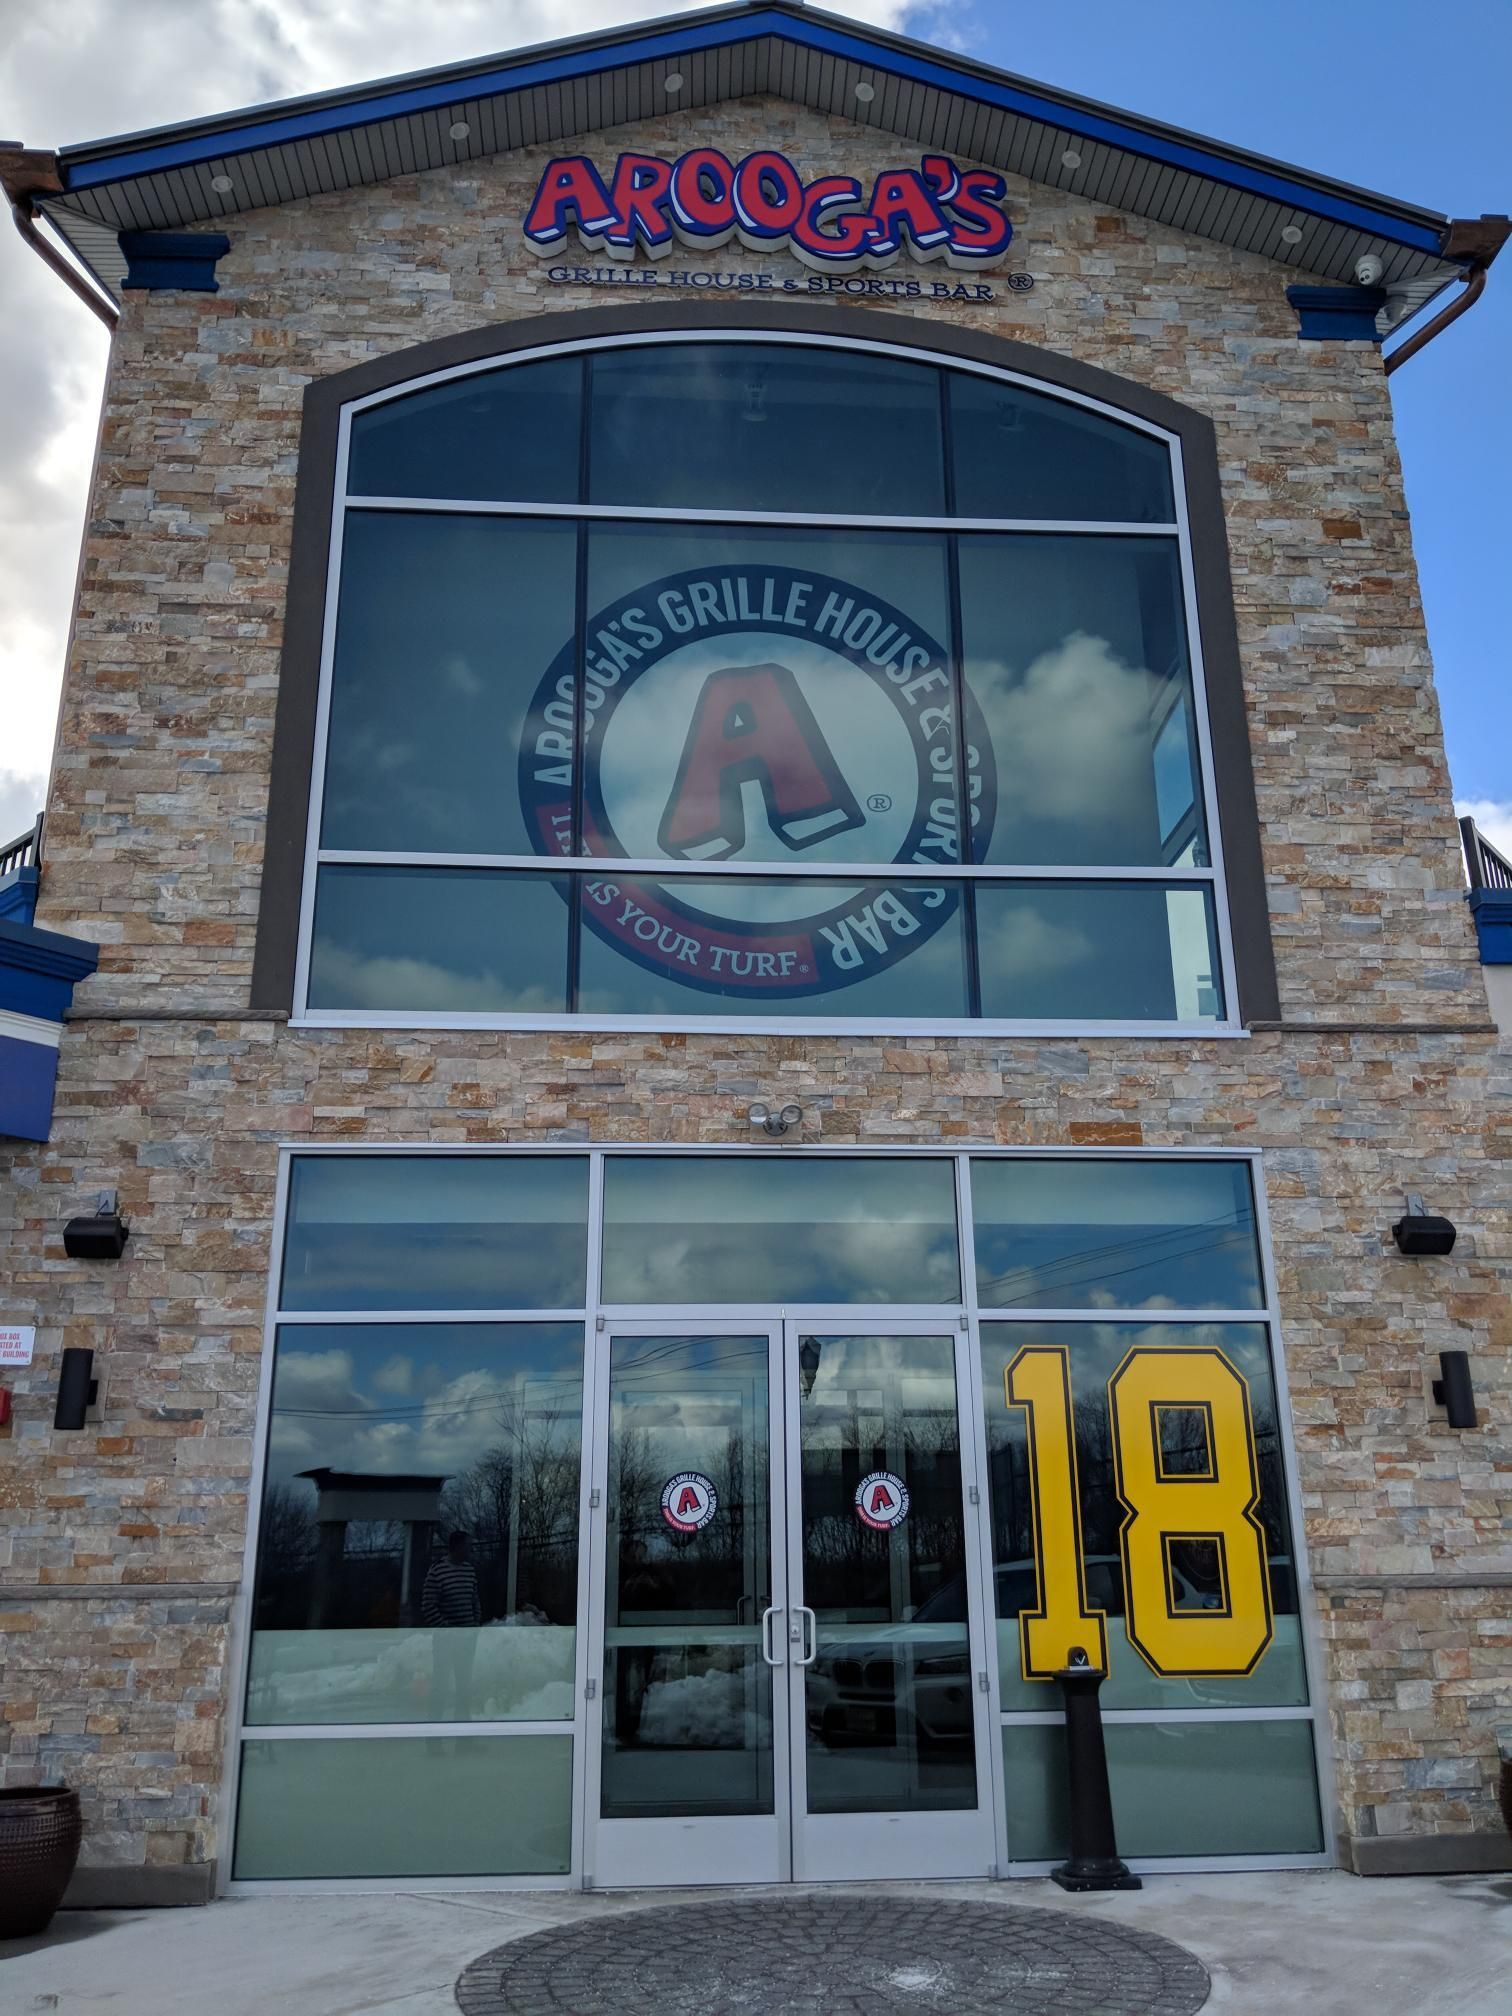 Arooga's Grille House & Sports Bar Is Coming Soon to Mercer County, NJ